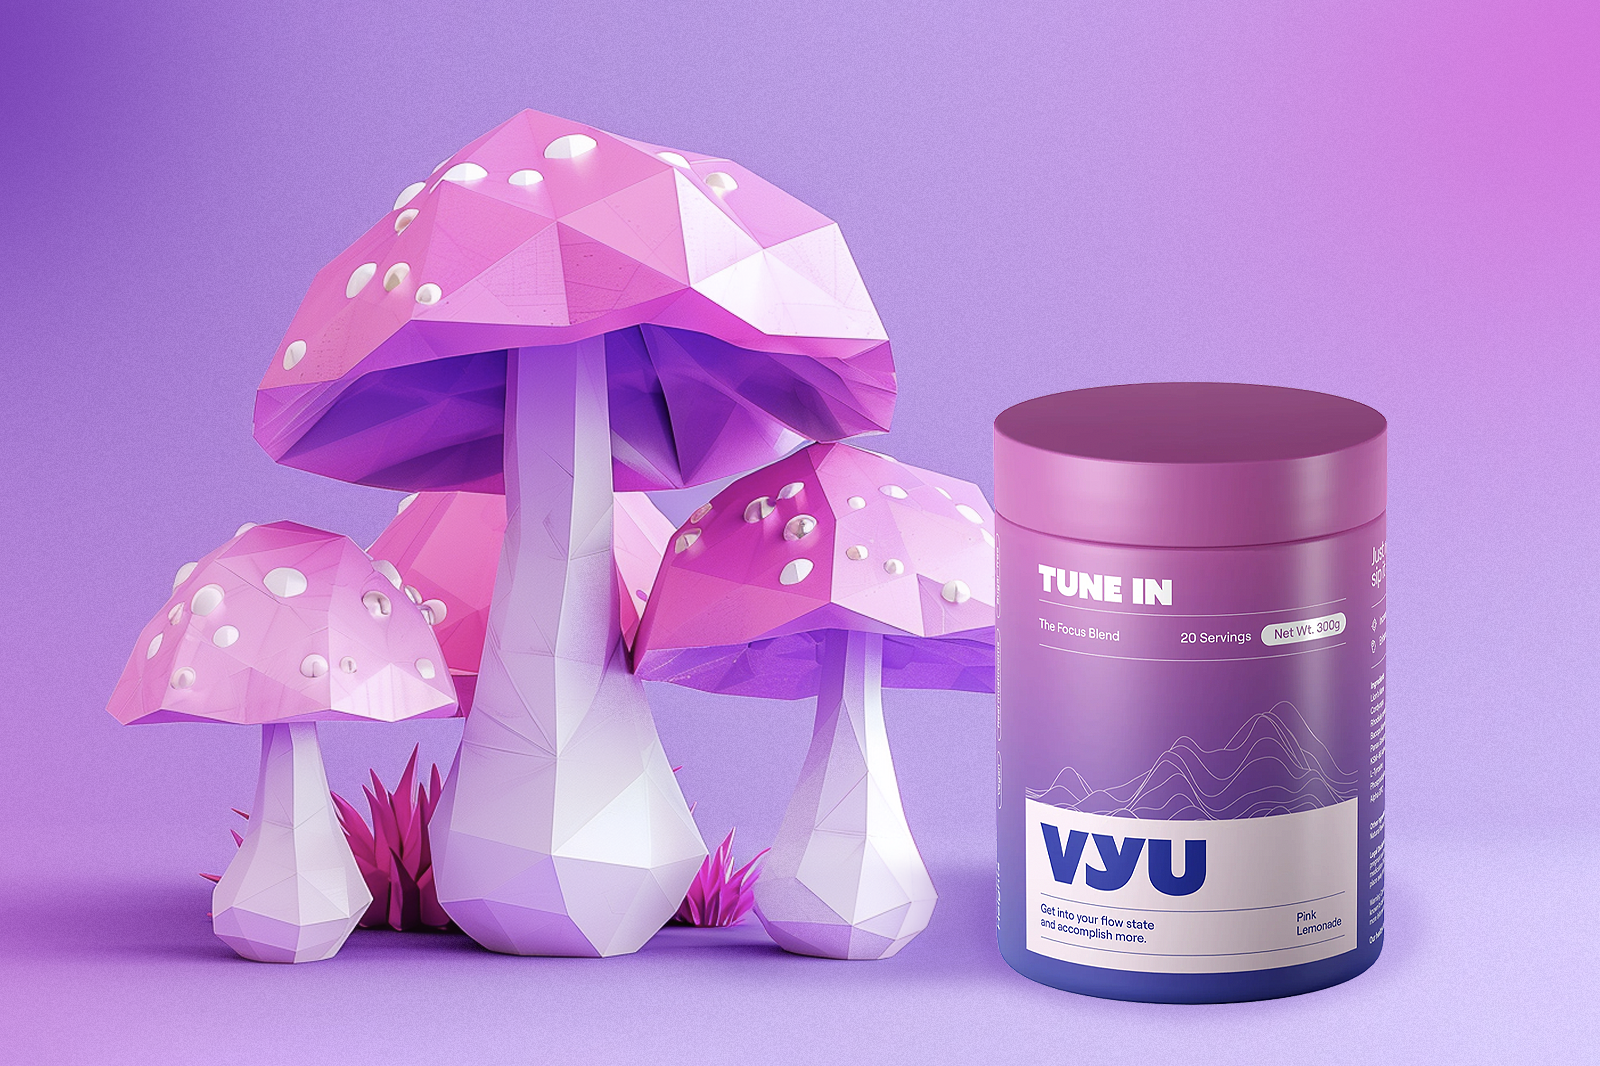 A VYU TUNE IN container with Pink Lemonade flavor is set against a purple background, along with some mushrooms